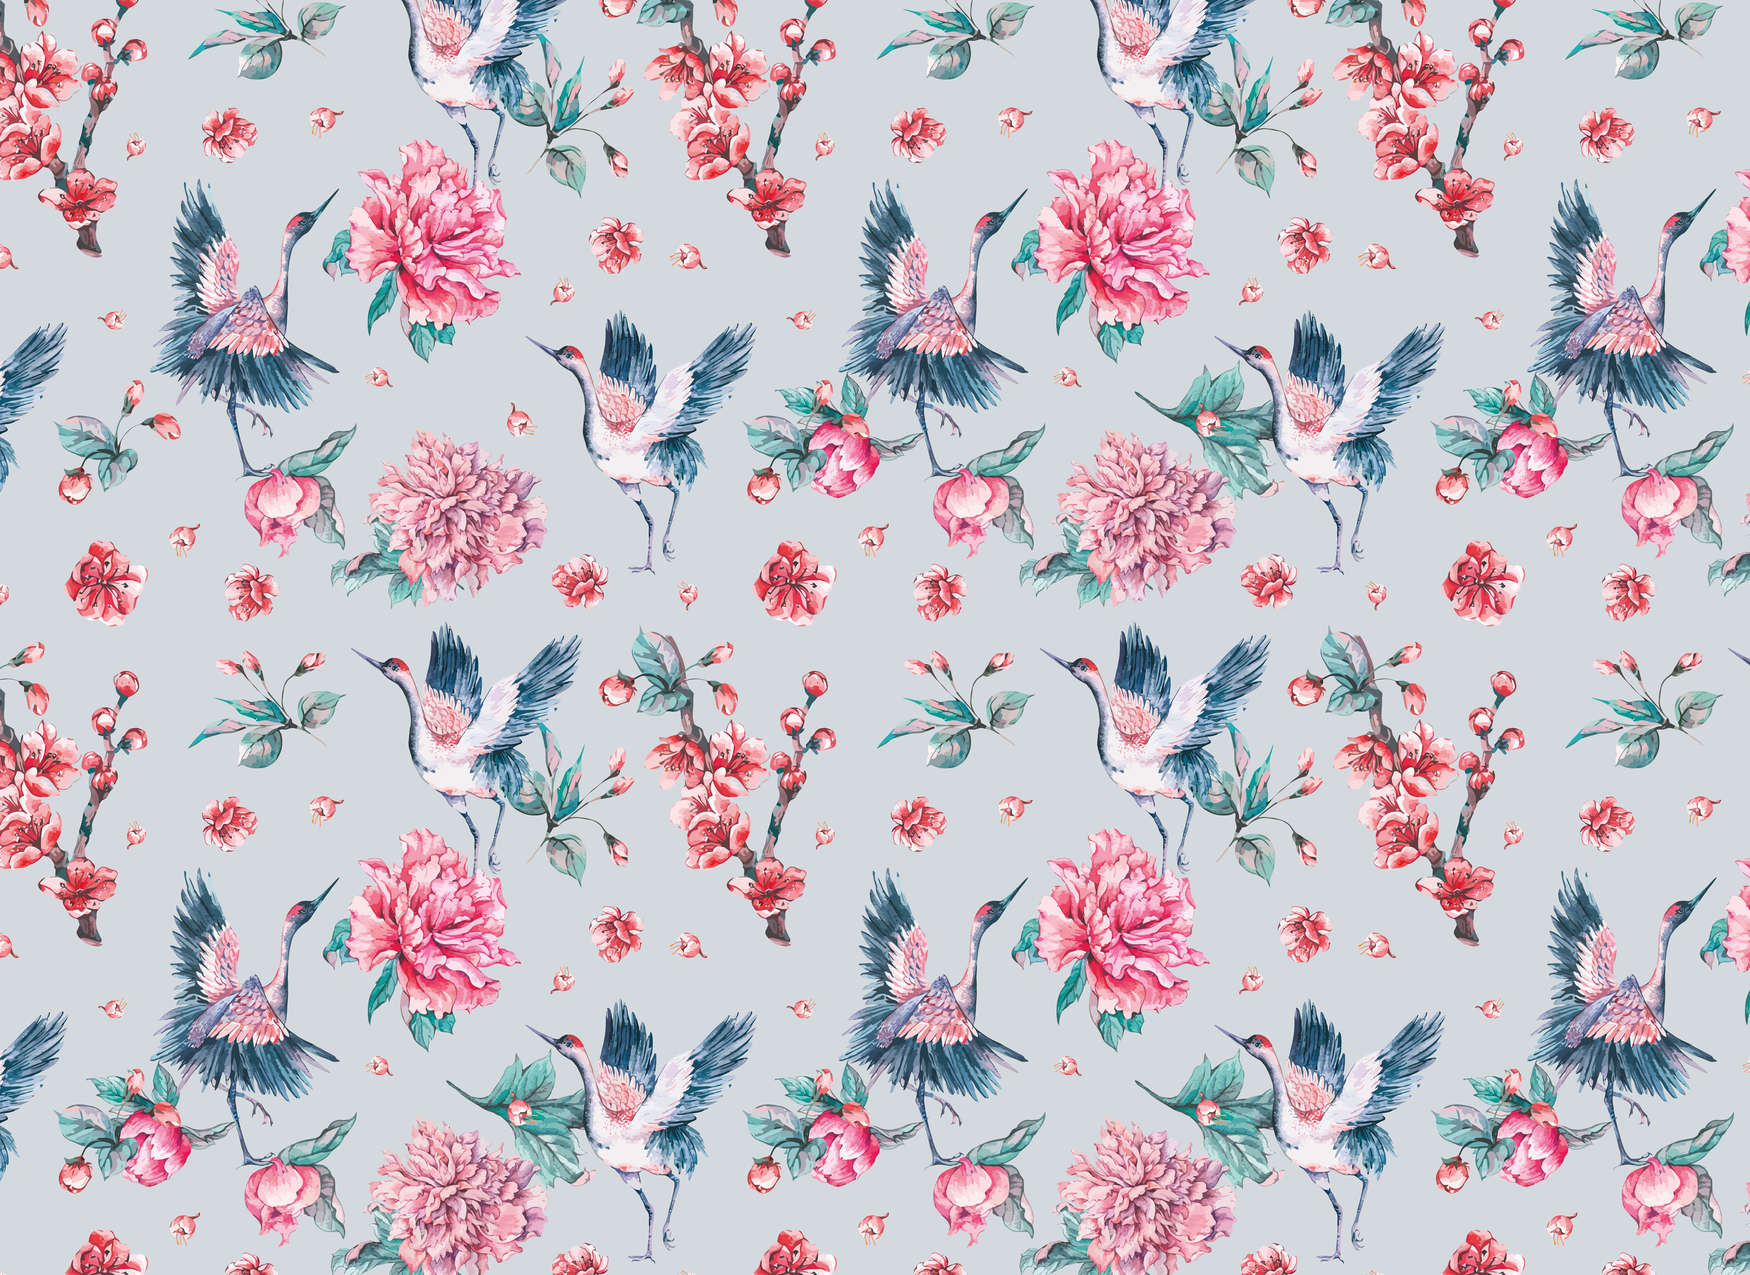             Photo wallpaper floral pattern with birds and leaves - pink, blue, green
        